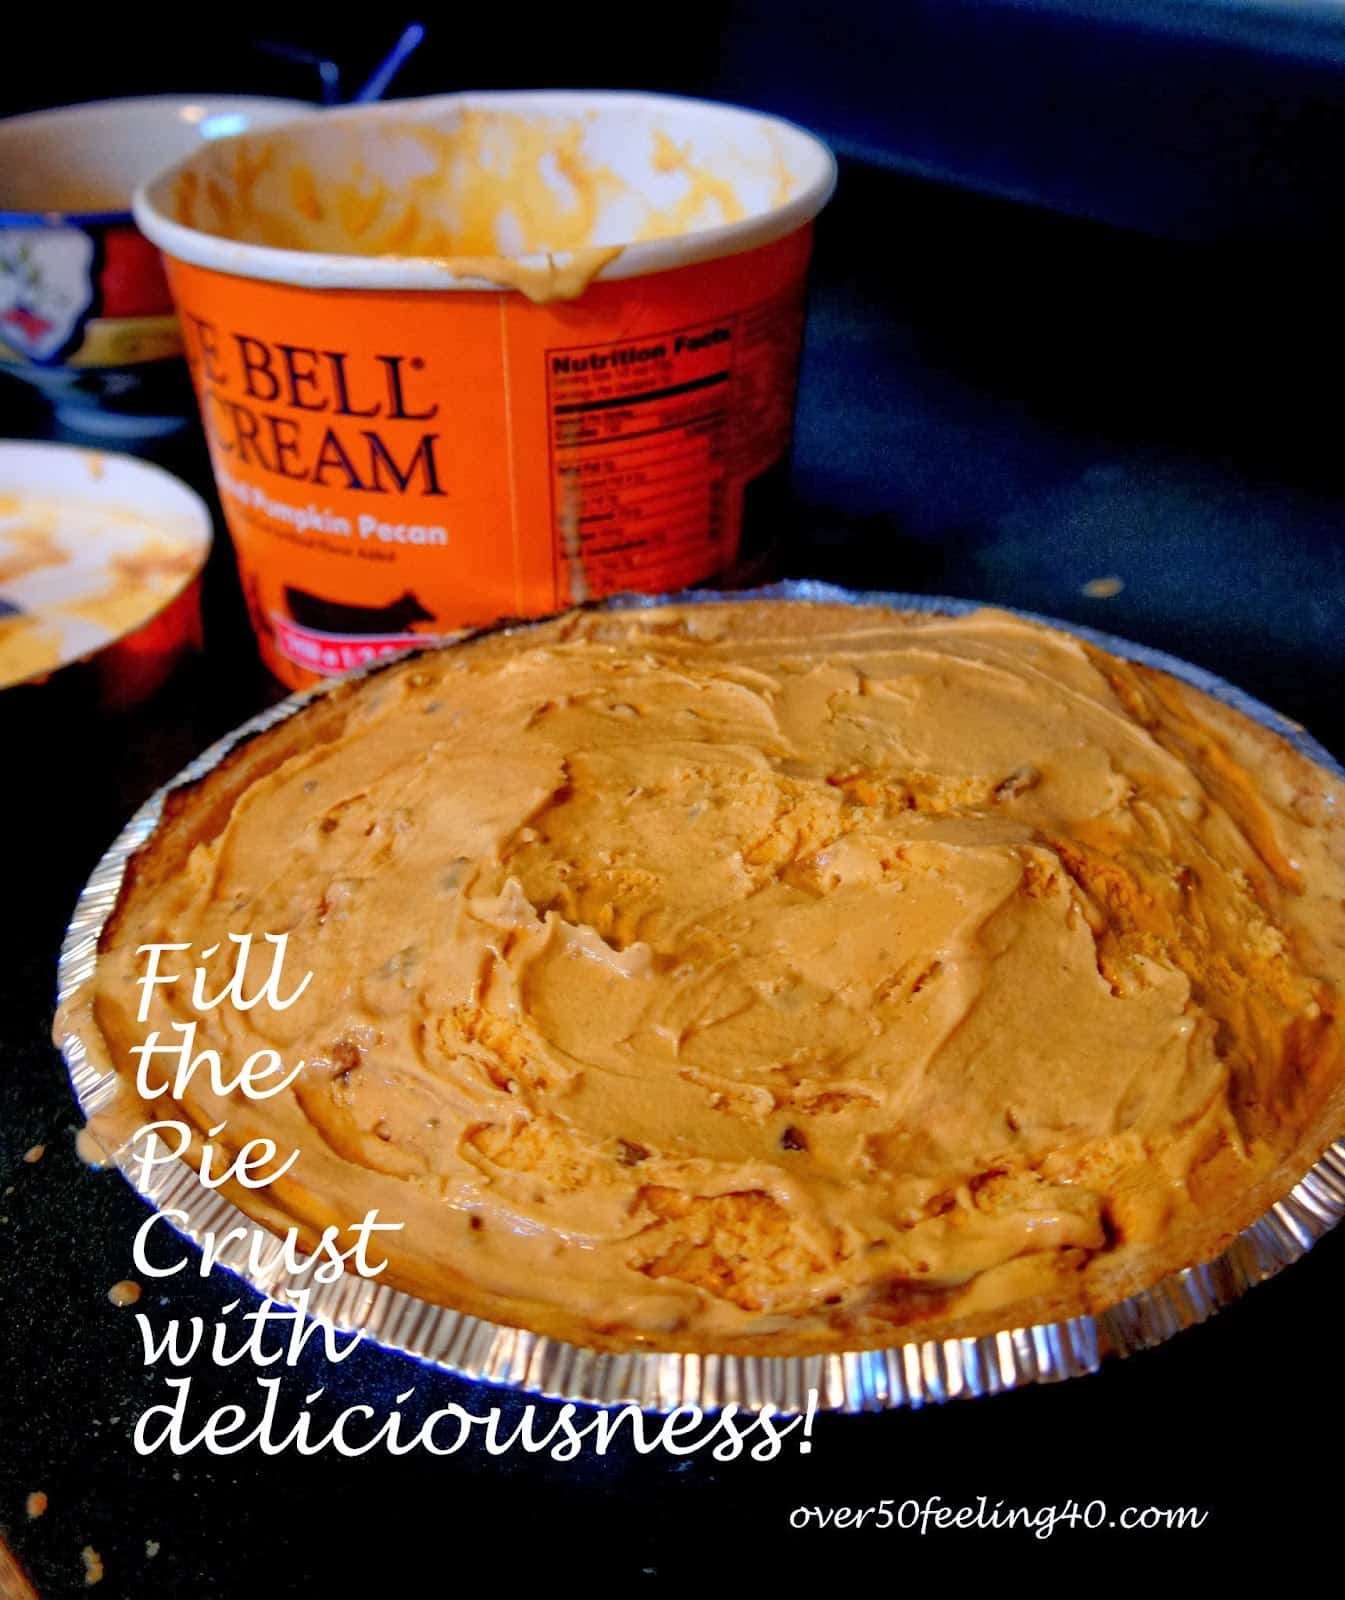 An Awesome, Yet Different Pumpkin Pie